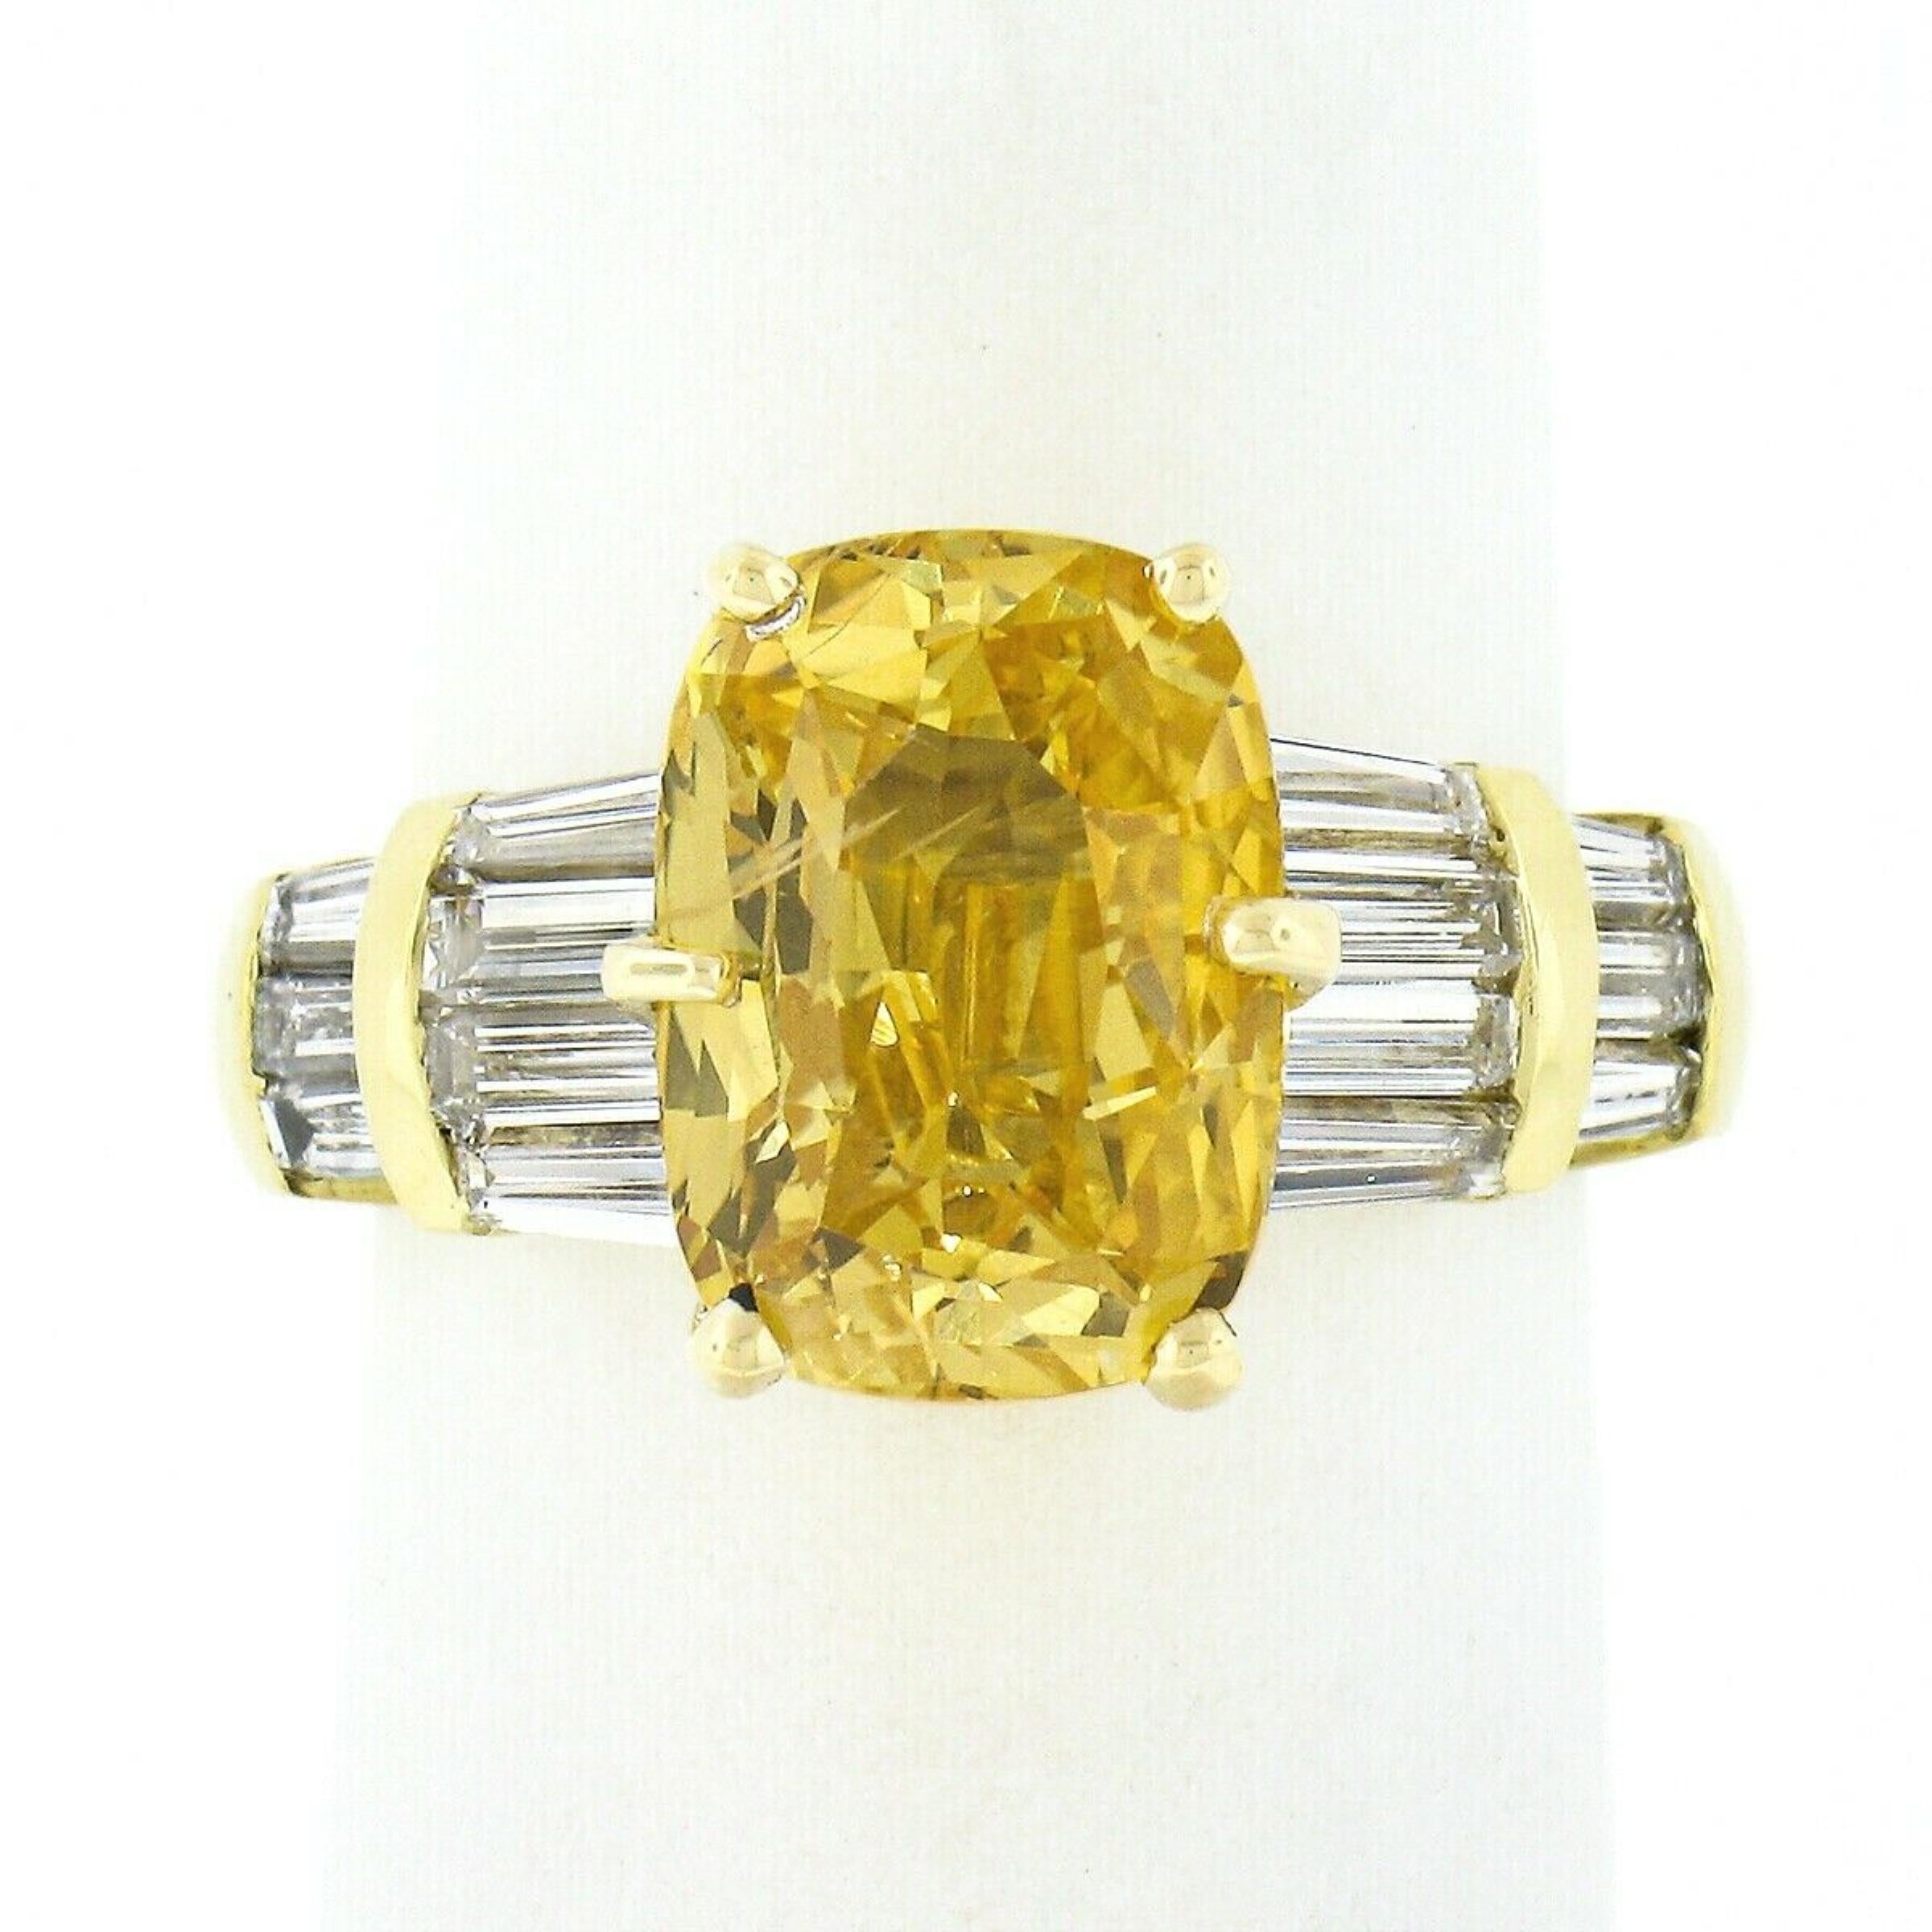 Here we have a truly magnificent yellow sapphire and diamond engagement ring crafted from solid 18k yellow gold. The ring features a natural, GIA certified, cushion cut yellow sapphire that weighs exactly 4.51 carats and is perfectly 6-prong set at